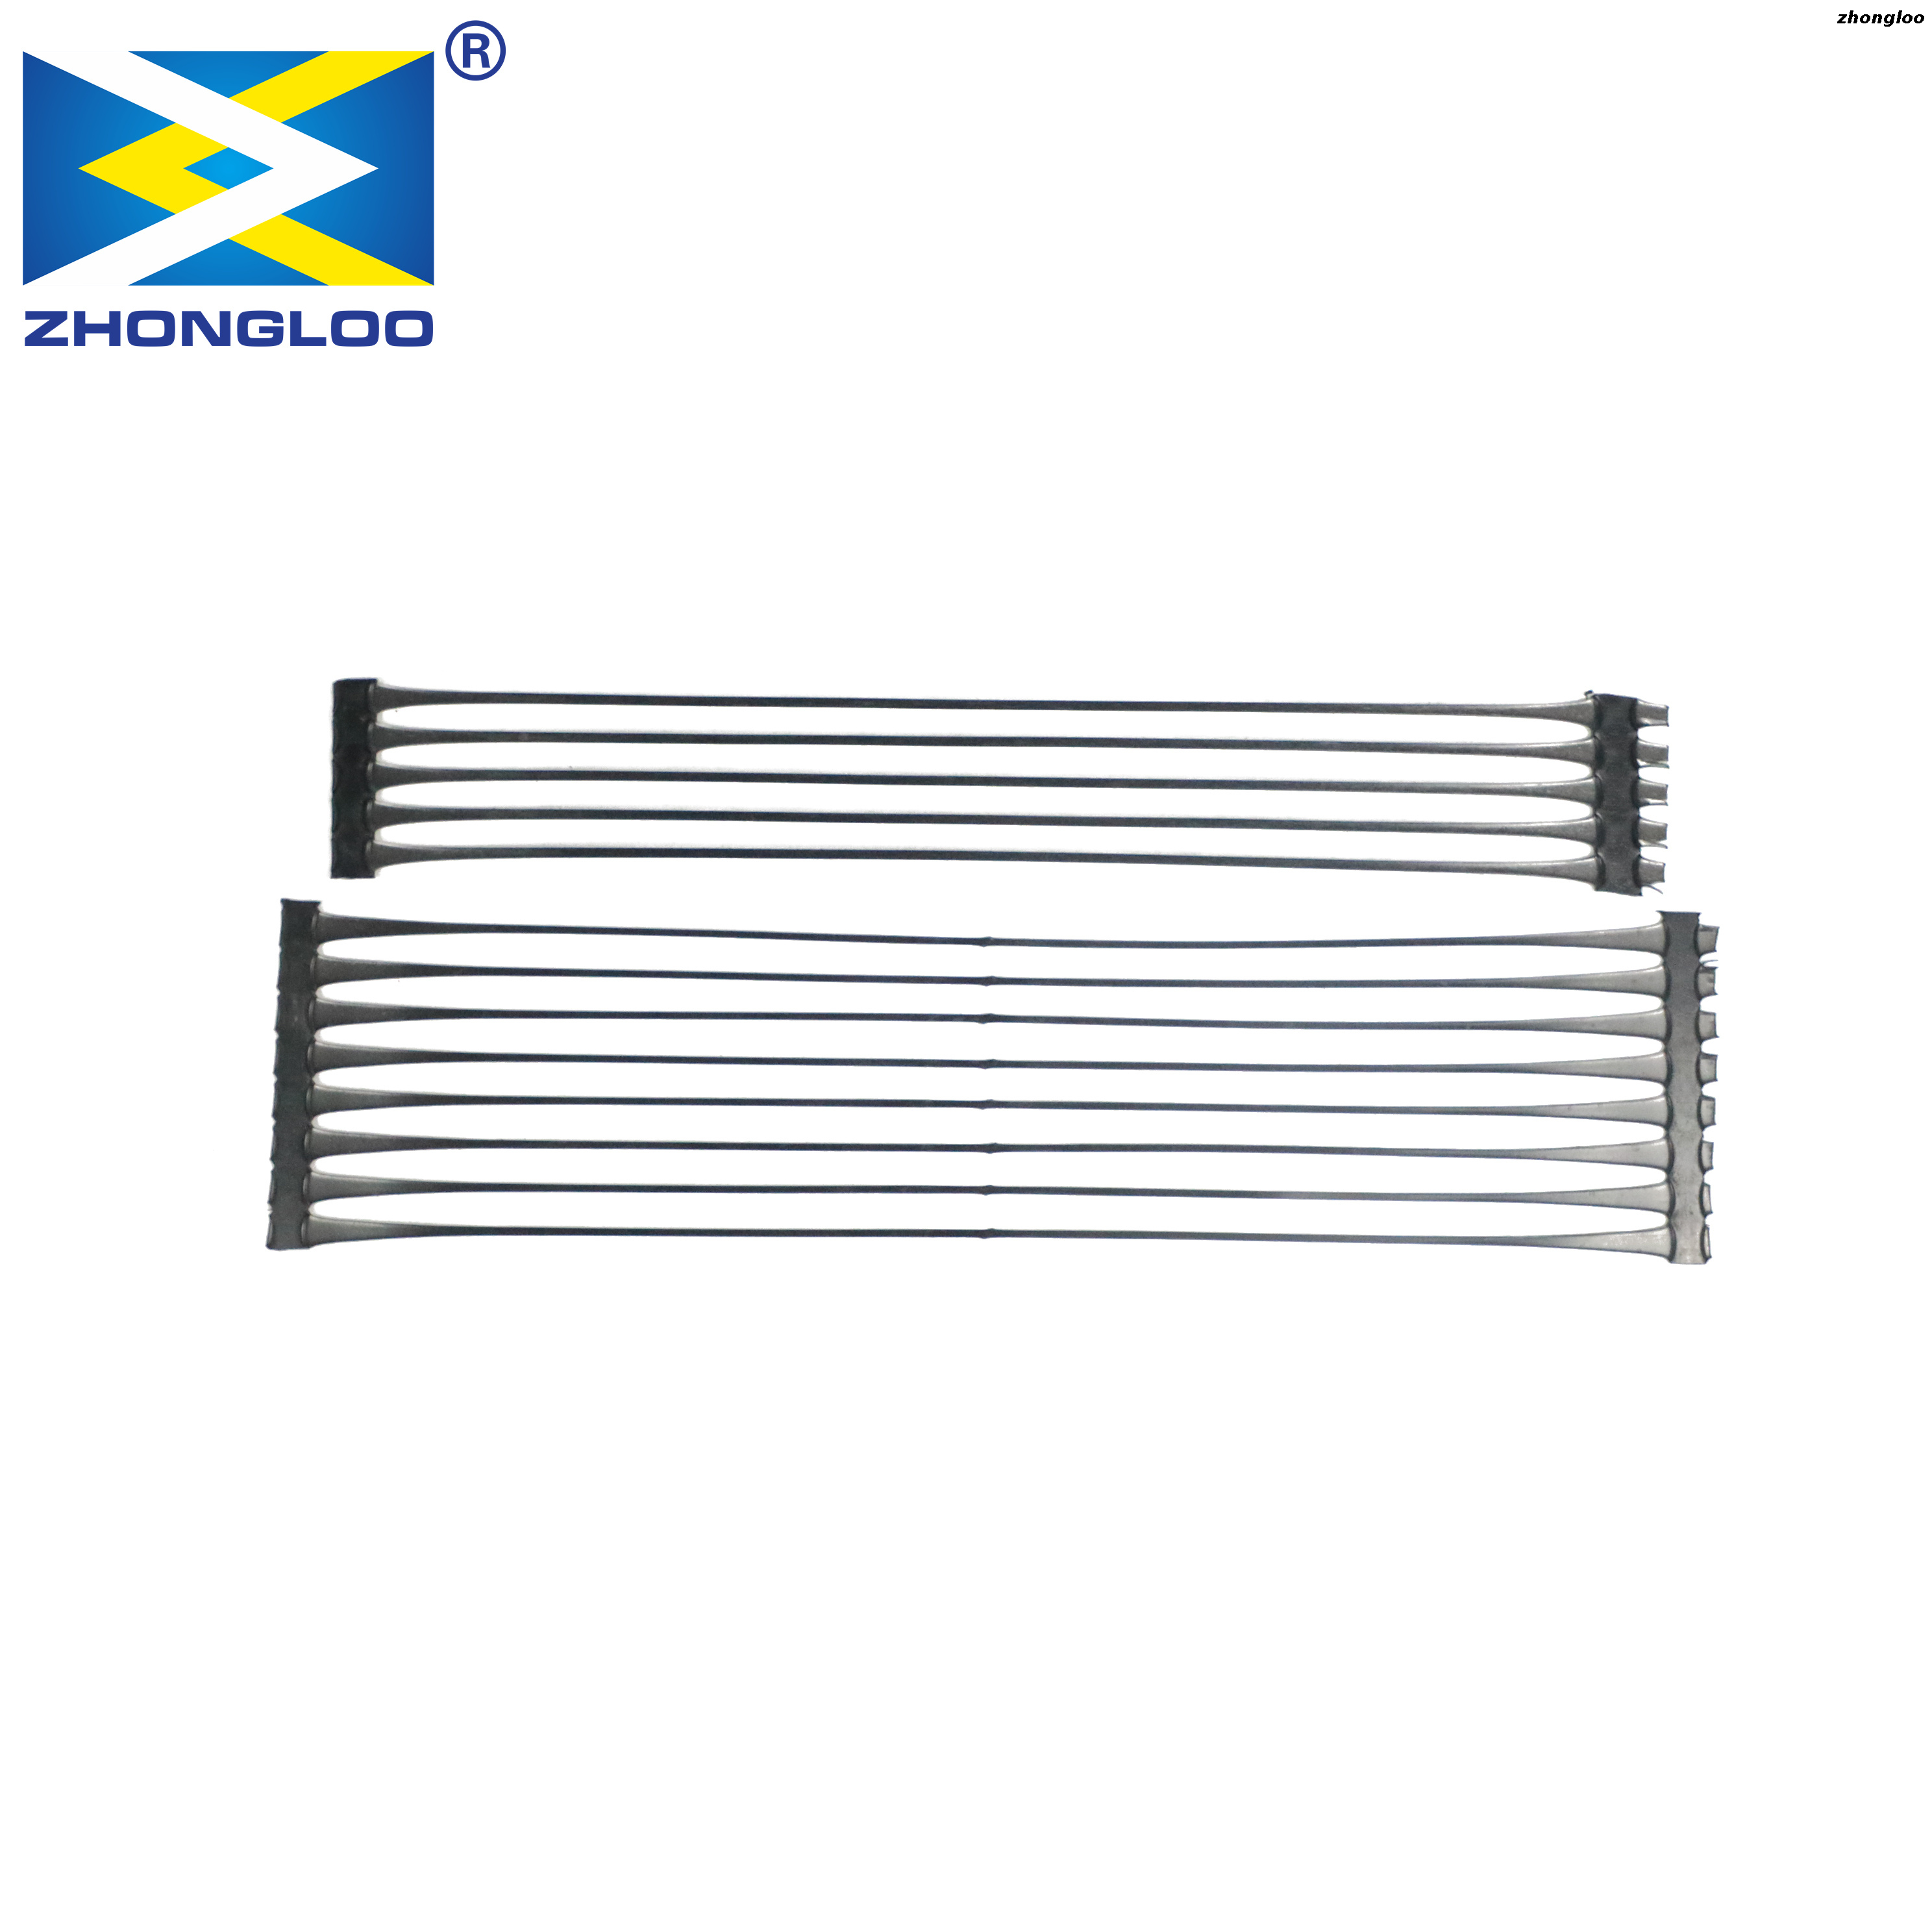 One-way Plastic Geogrid for Slope Protection Retaining Wall.